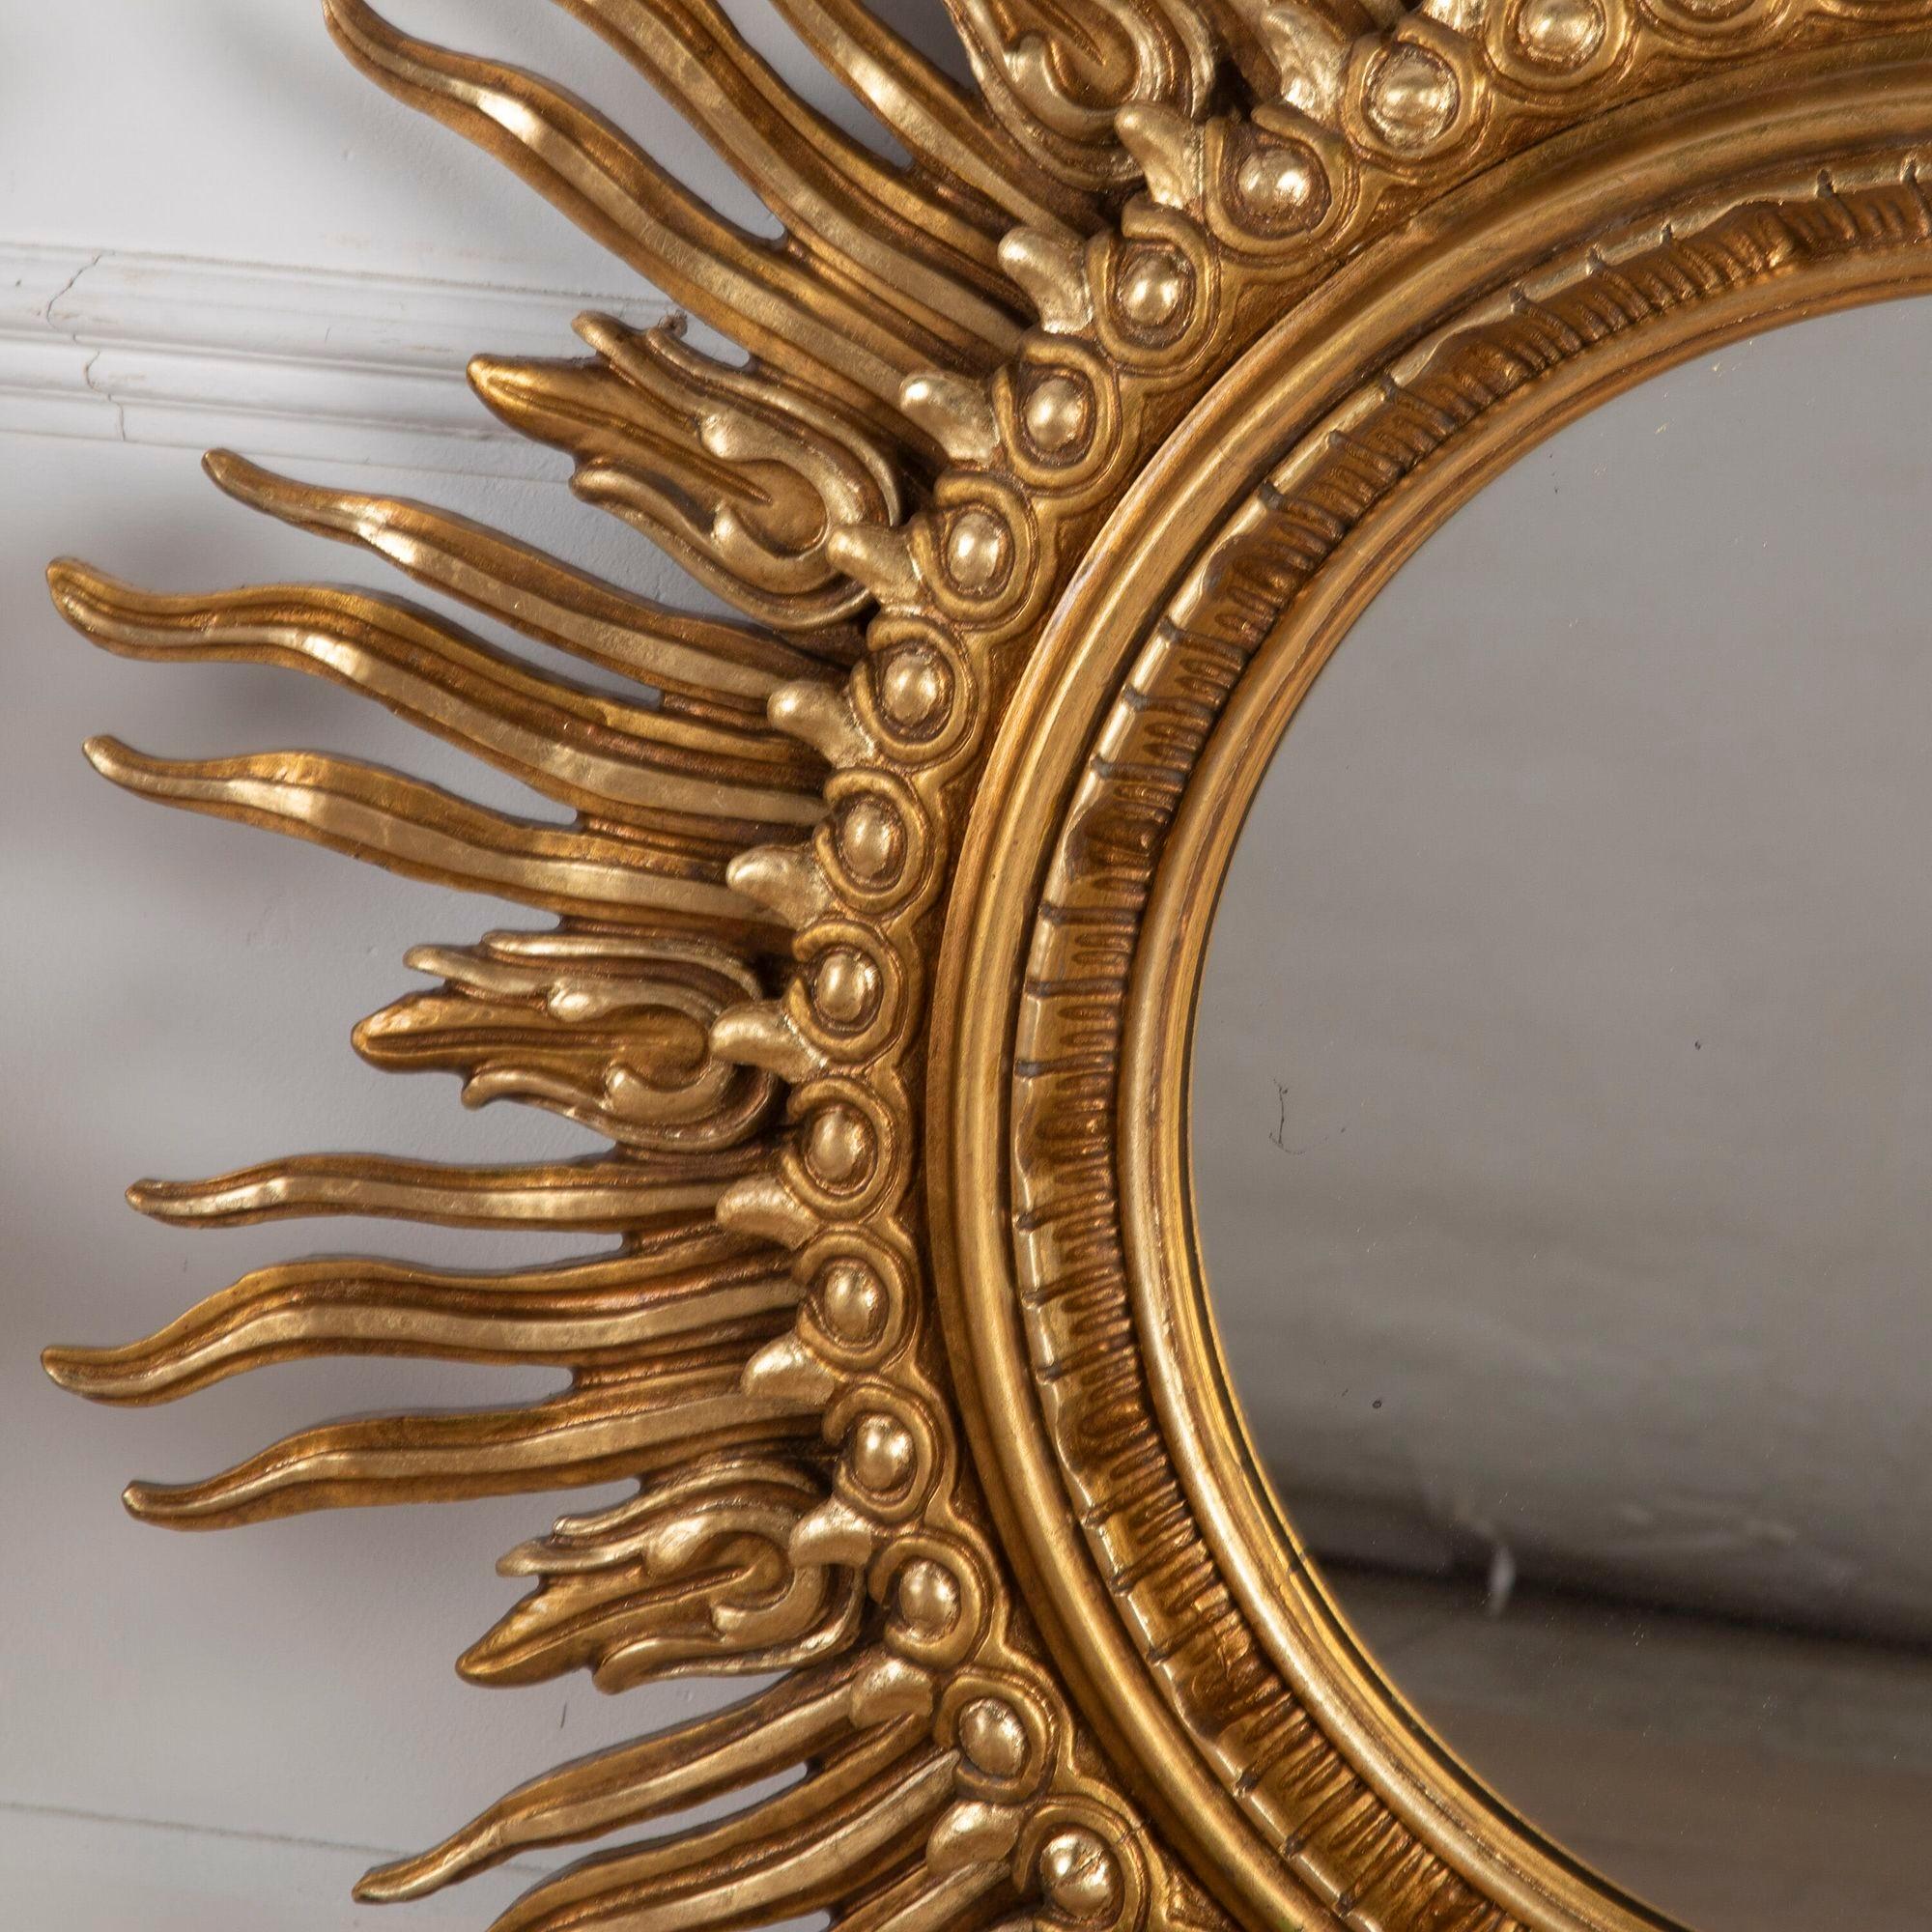 Stunning pair of 20th century hand-carved giltwood sun mirrors.
Made on two tiers with an original glass plate by Francisco Hurtado, Valencia, Spain circa 1950-1960.
With its original maker's label on the back of both. Unusual to find individually